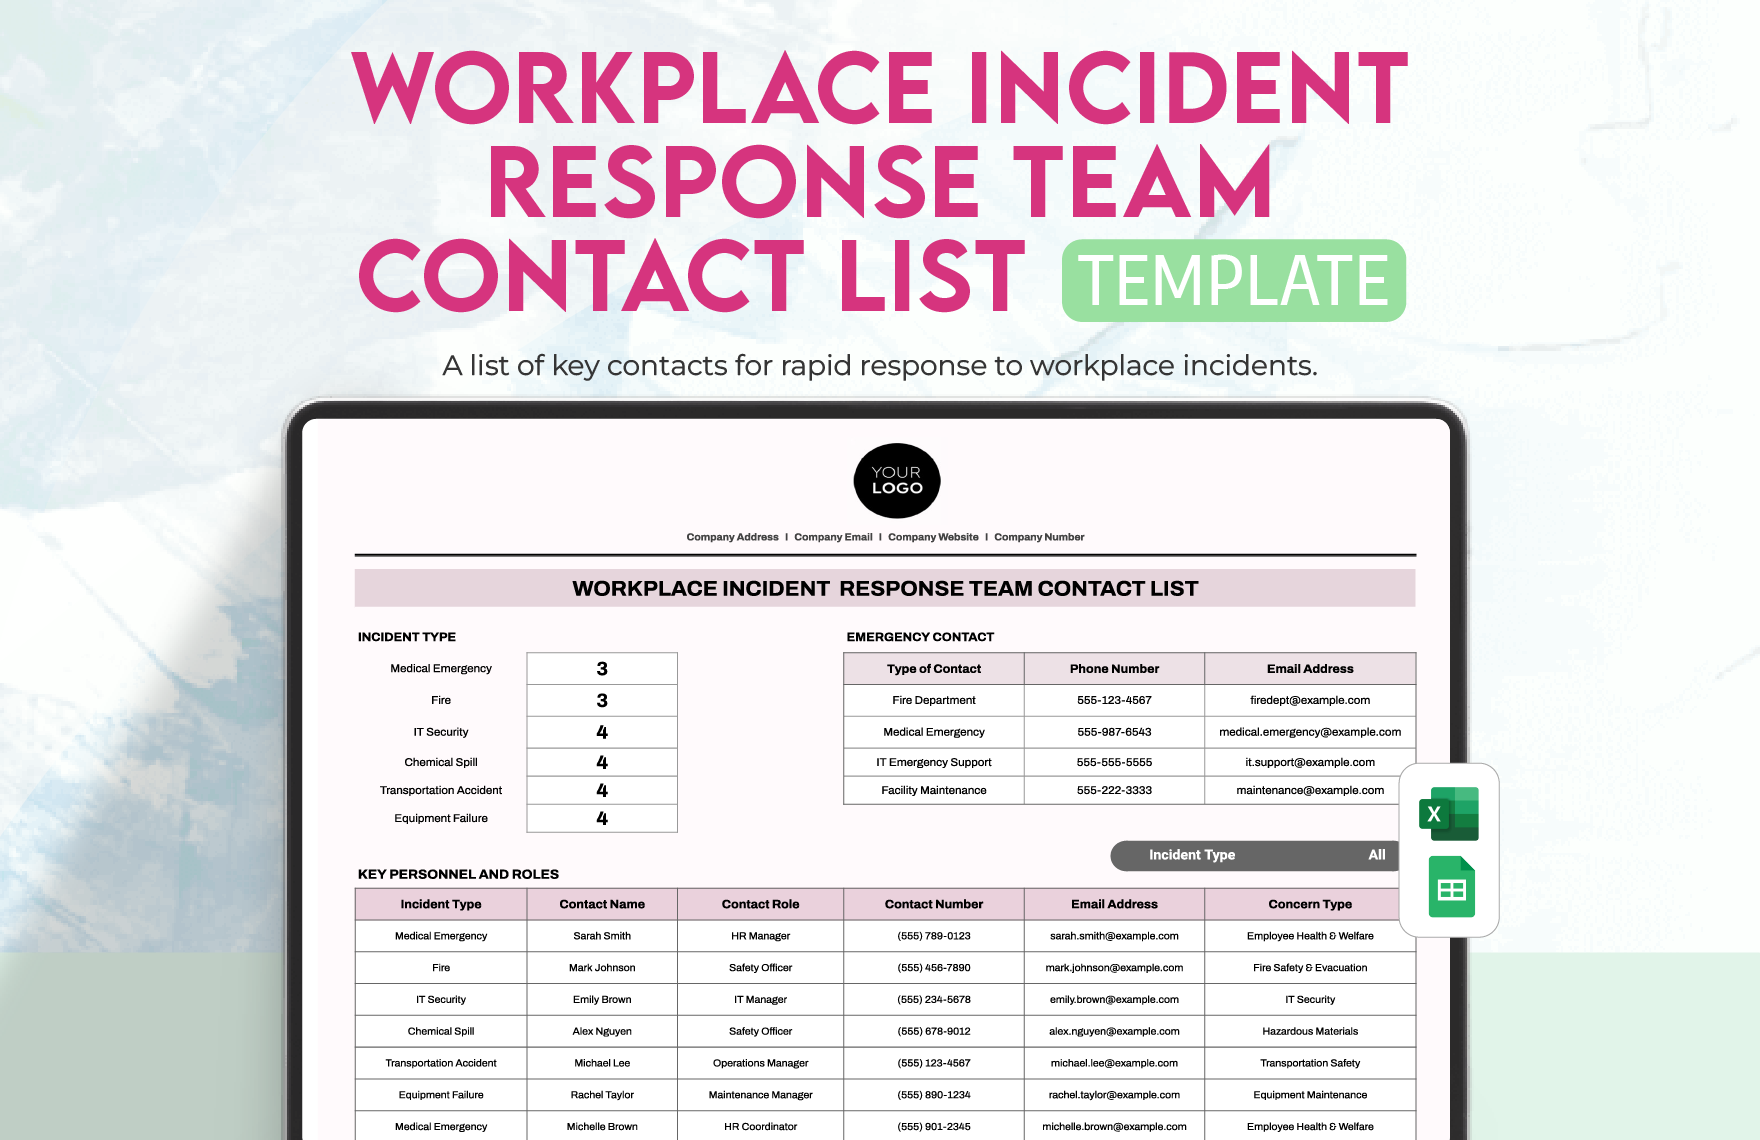 Workplace Incident Response Team Contact List Template in Excel, Google Sheets